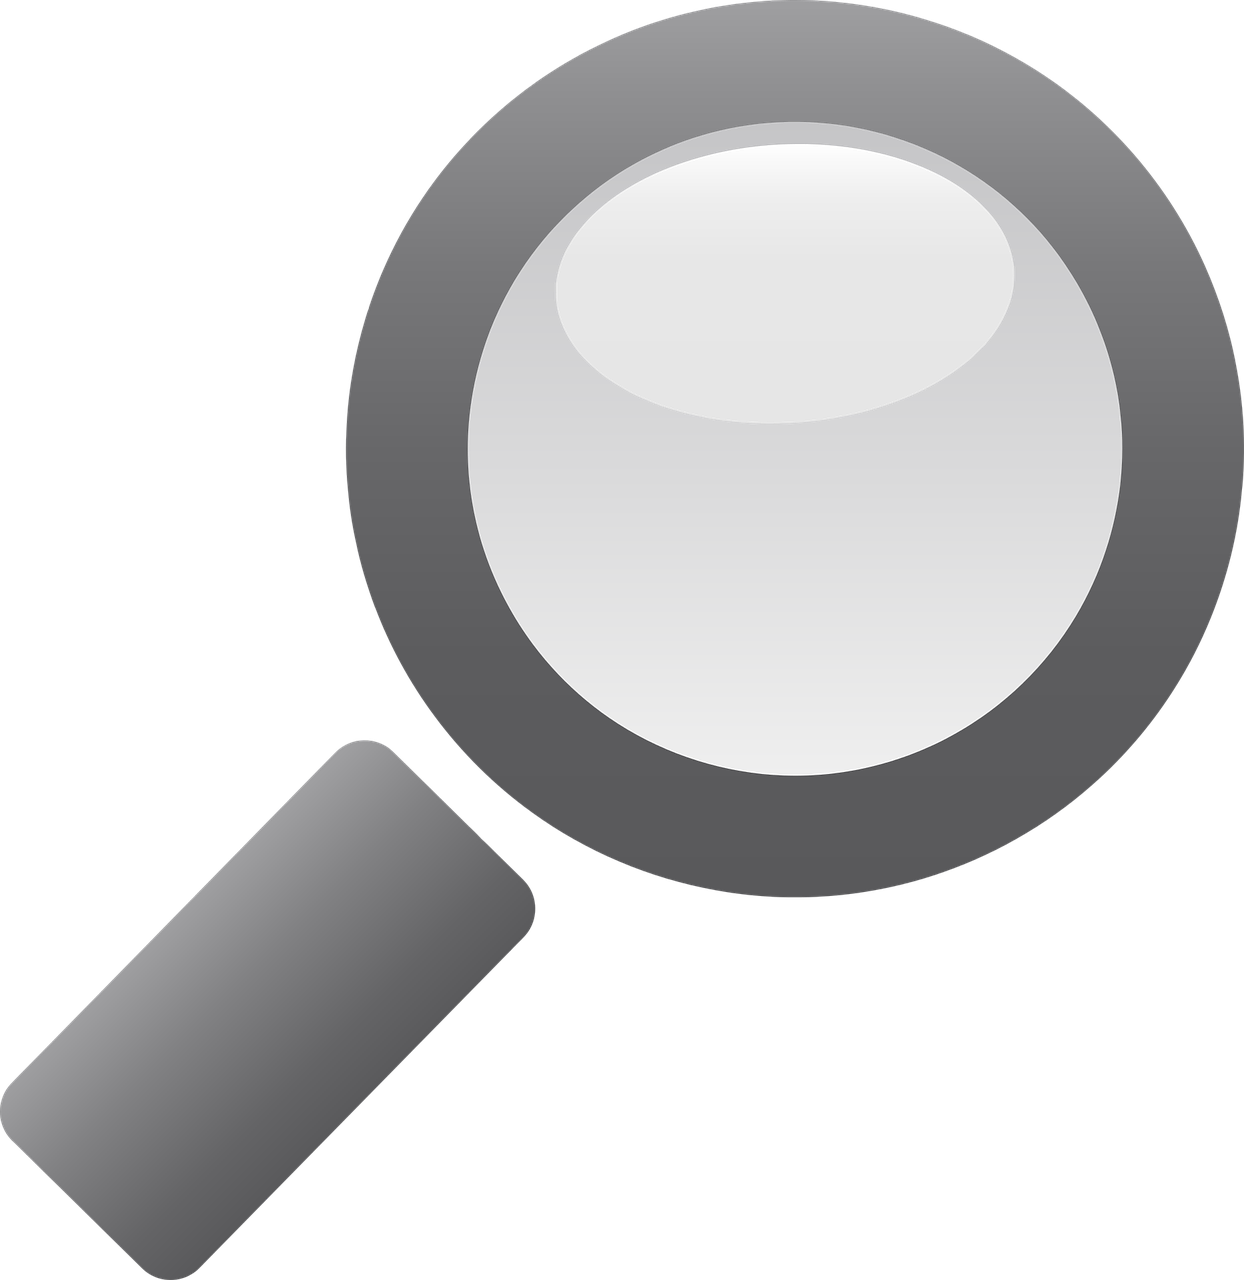 a magnifying glass on a black background, an illustration of, by Adam Manyoki, pixabay, minimalism, sharp focus vector centered, gray, clipart, everyday plain object